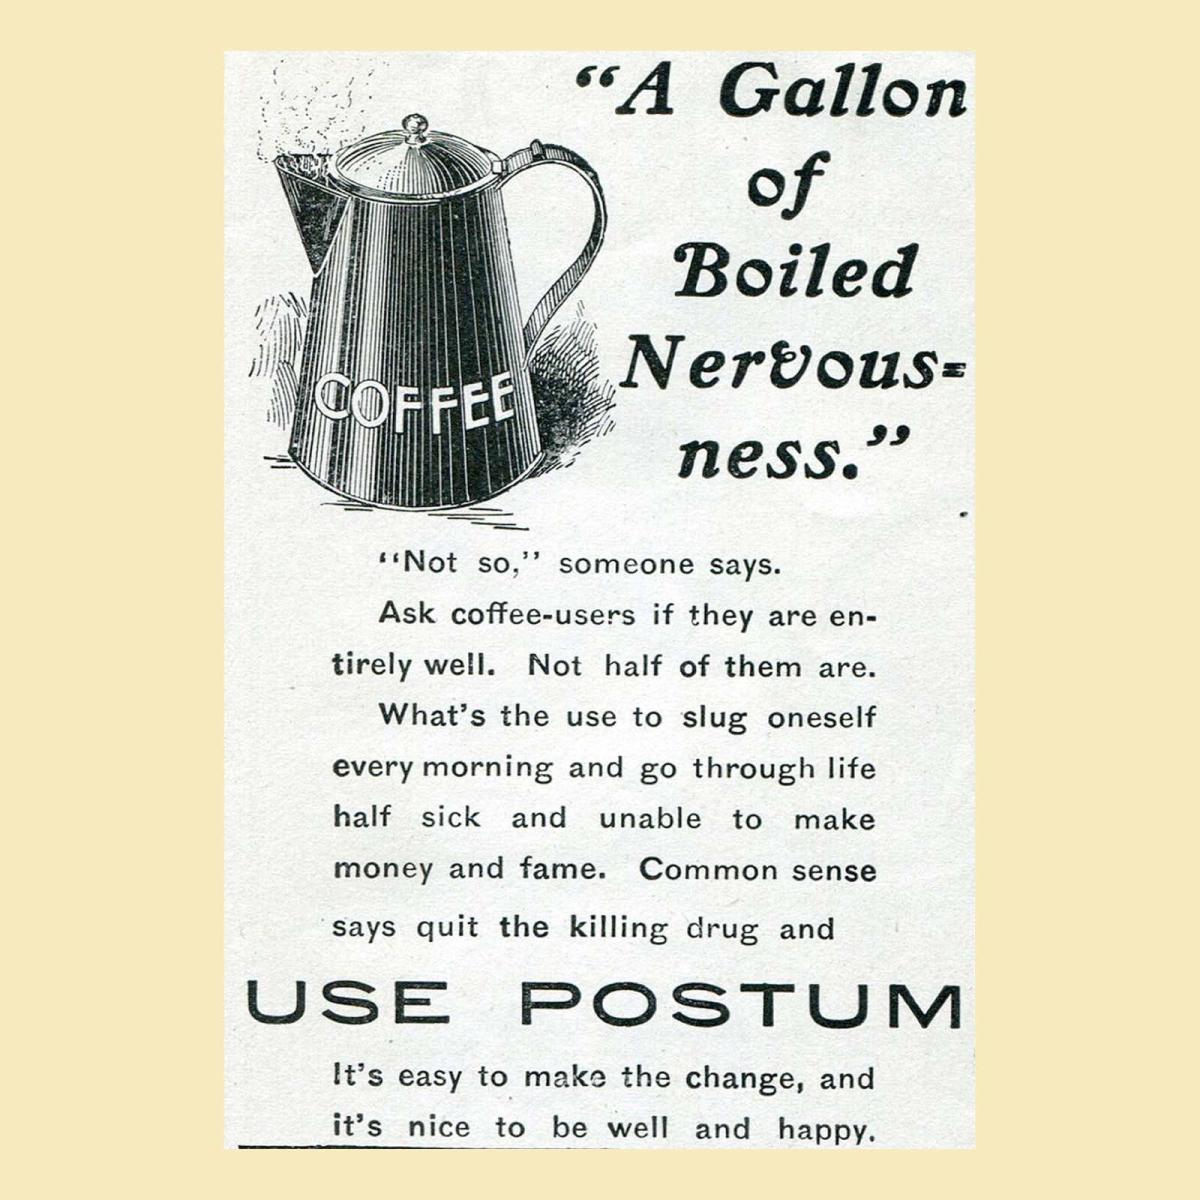 A black and white ad for Postum, a coffee alternative